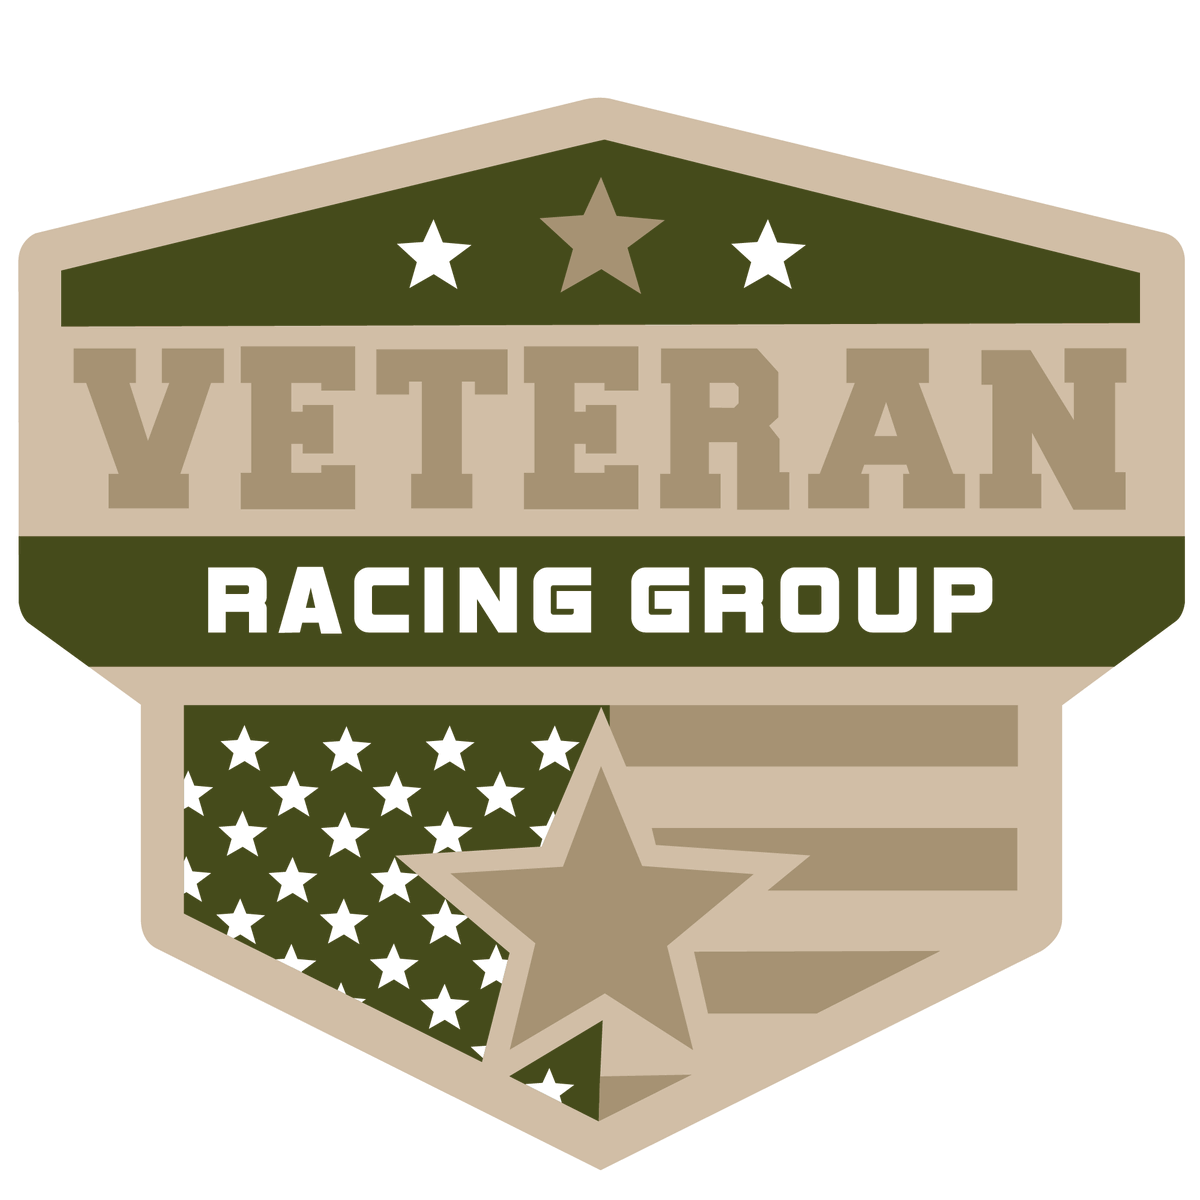 We have some updated logos! Army colors baby! Let's go! #army #Veterans #Veteran #combatveterans #motorsports #veteransupport